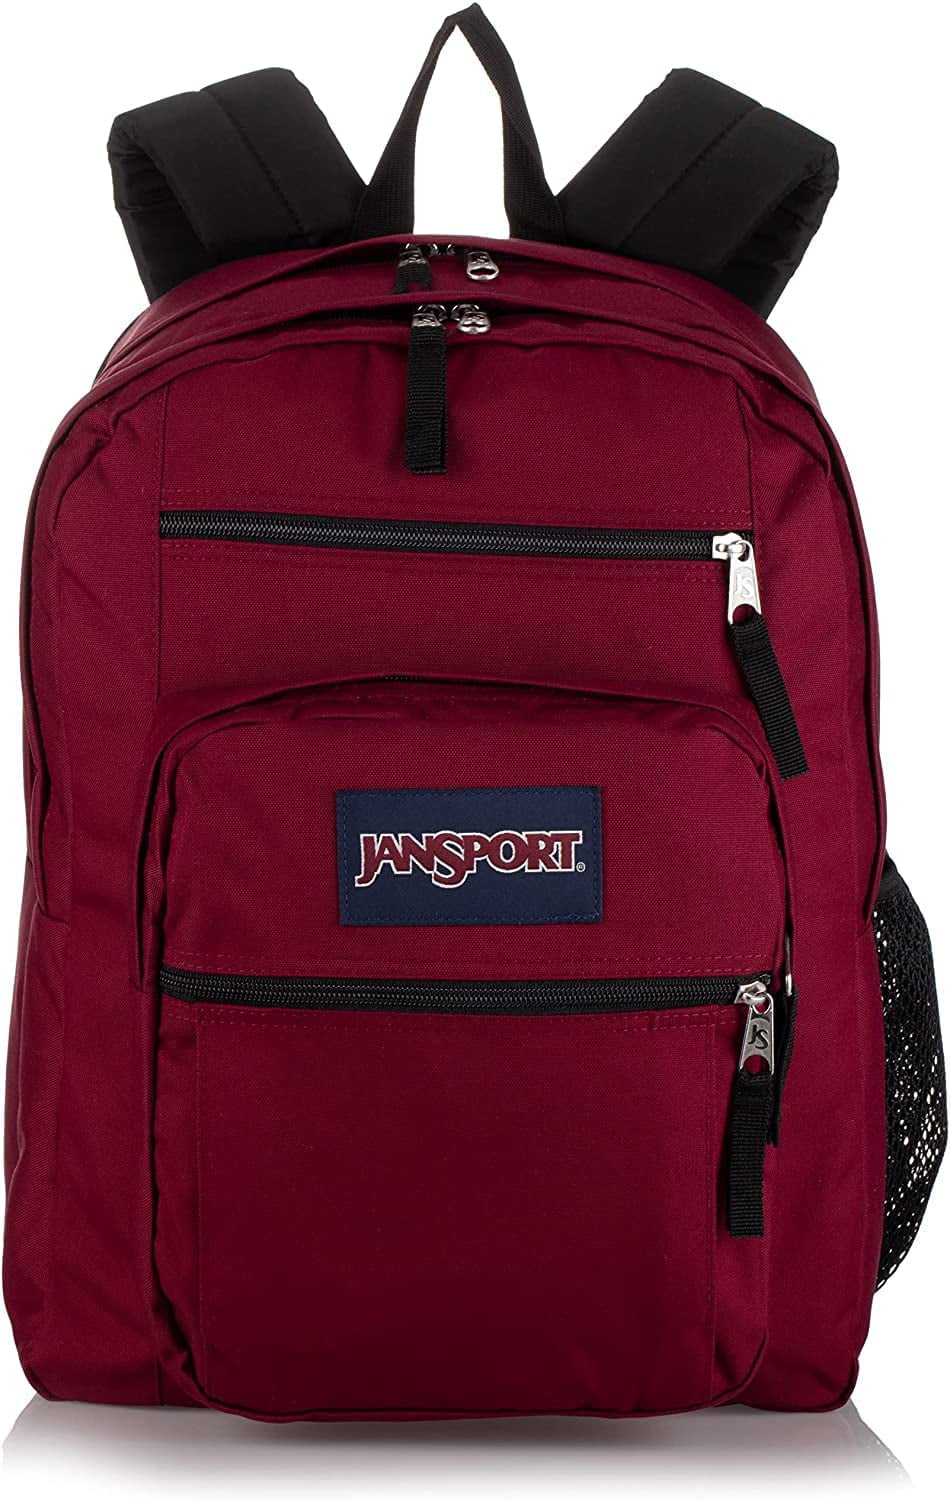 JanSport Big Student Backpack - School, Travel, Or Work Bookbag With  15-Inch Laptop Compartment(RUSSET RED)